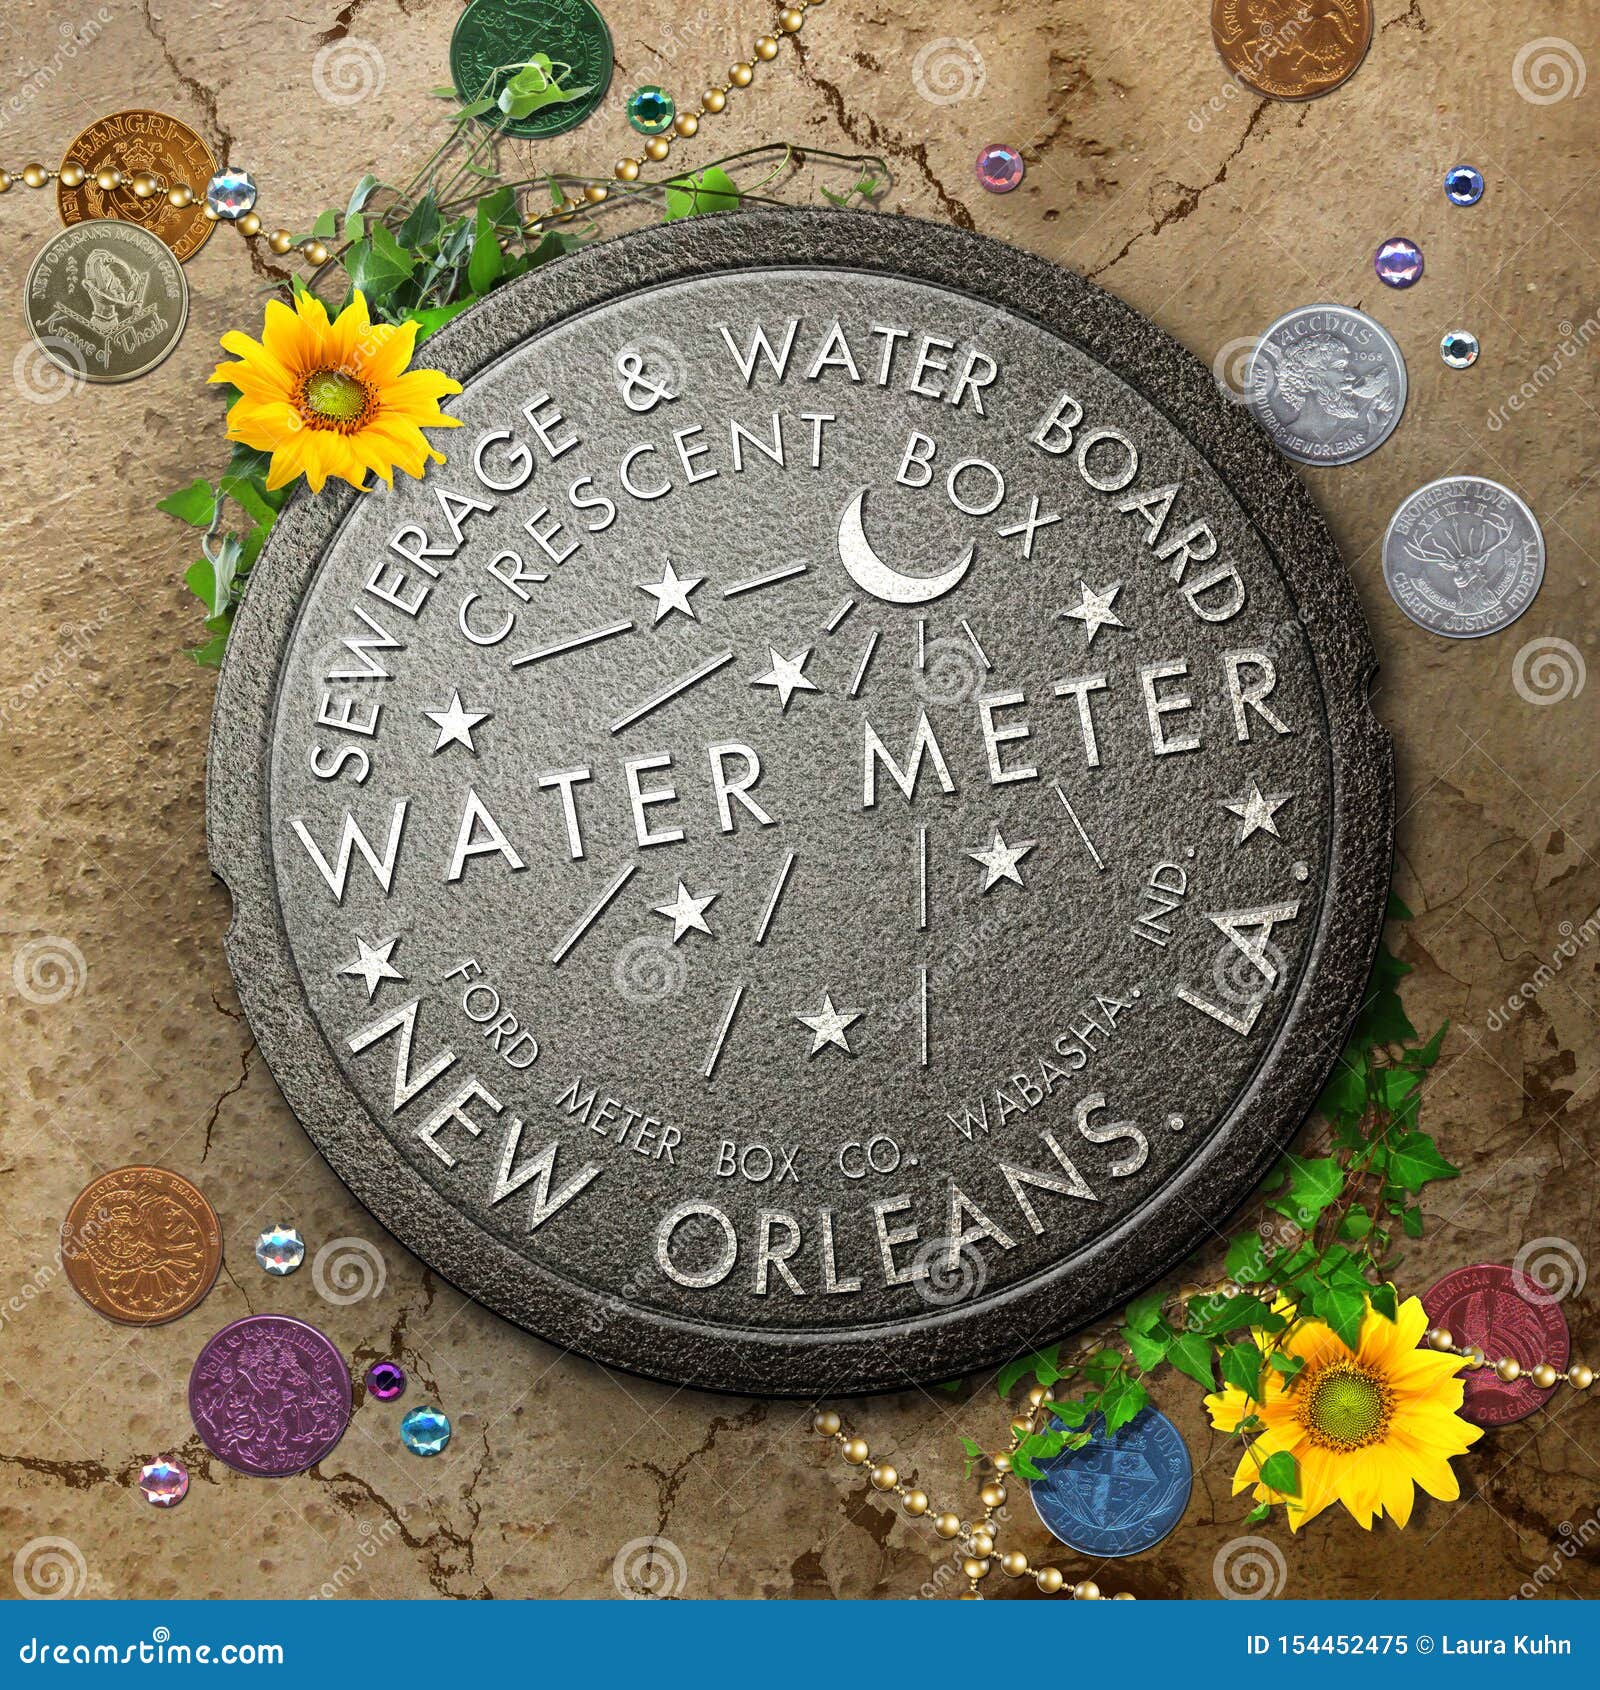 french quarter new orleans louisiana water meter sewerage cover